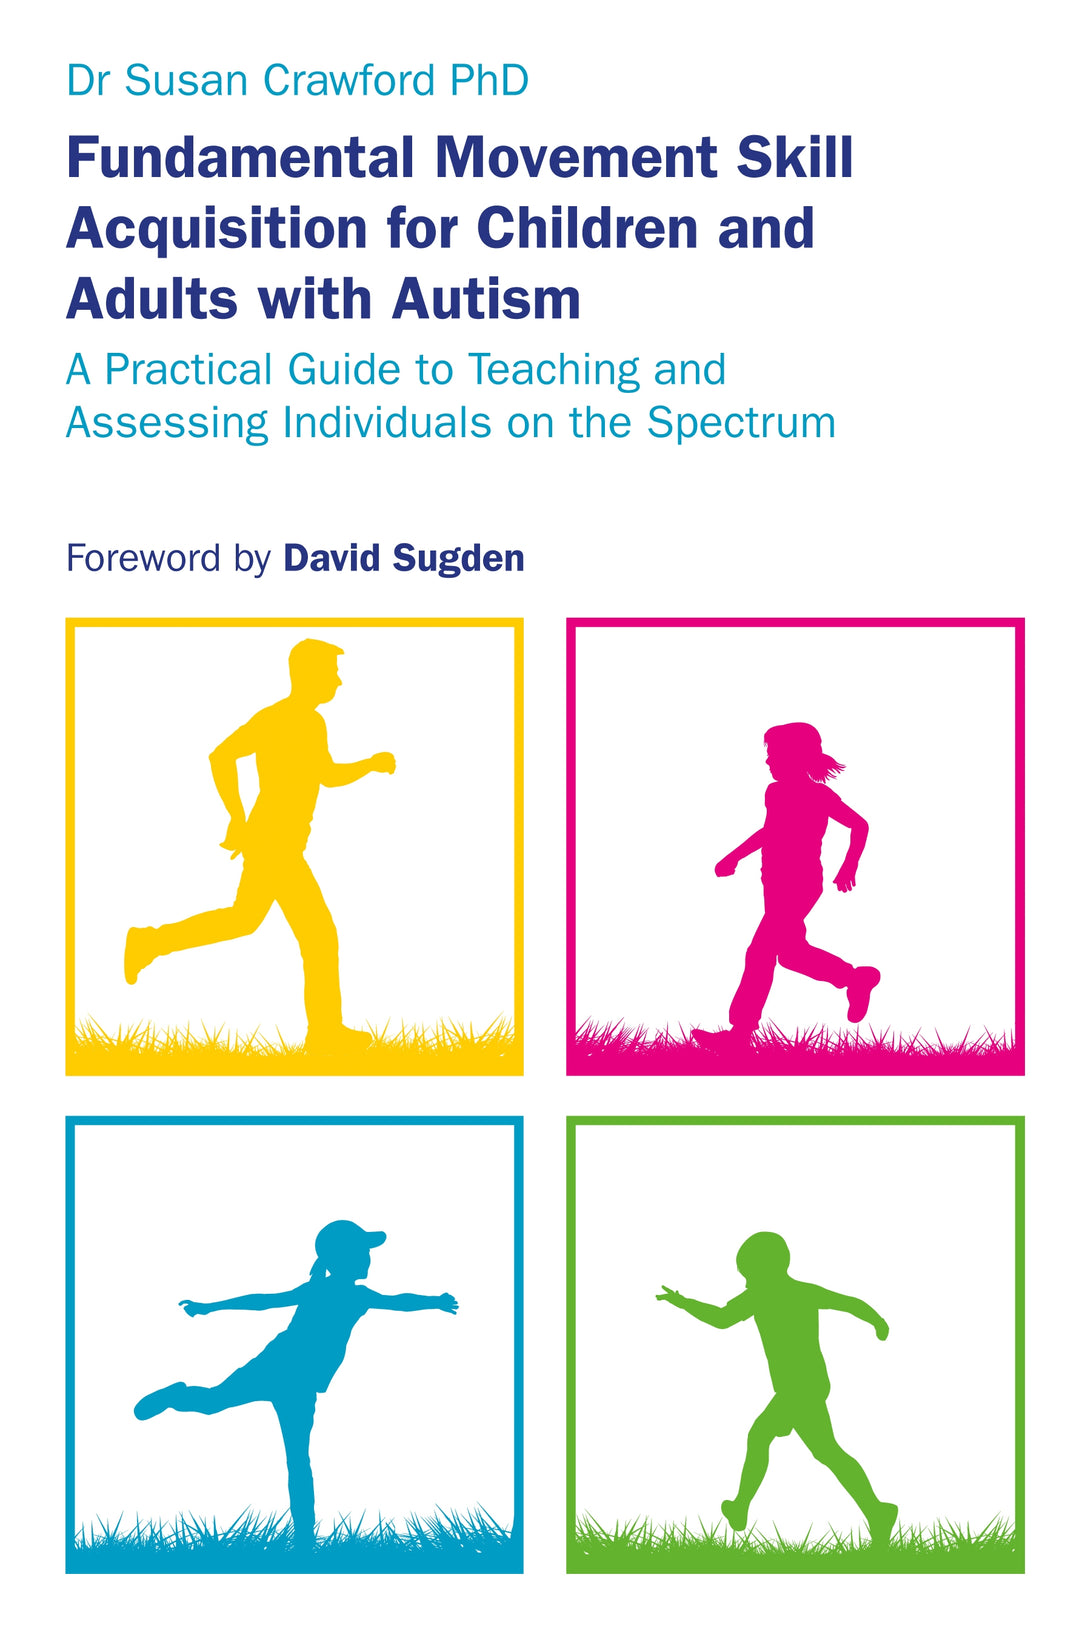 Fundamental Movement Skill Acquisition for Children and Adults with Autism by David Sugden, Susan Crawford